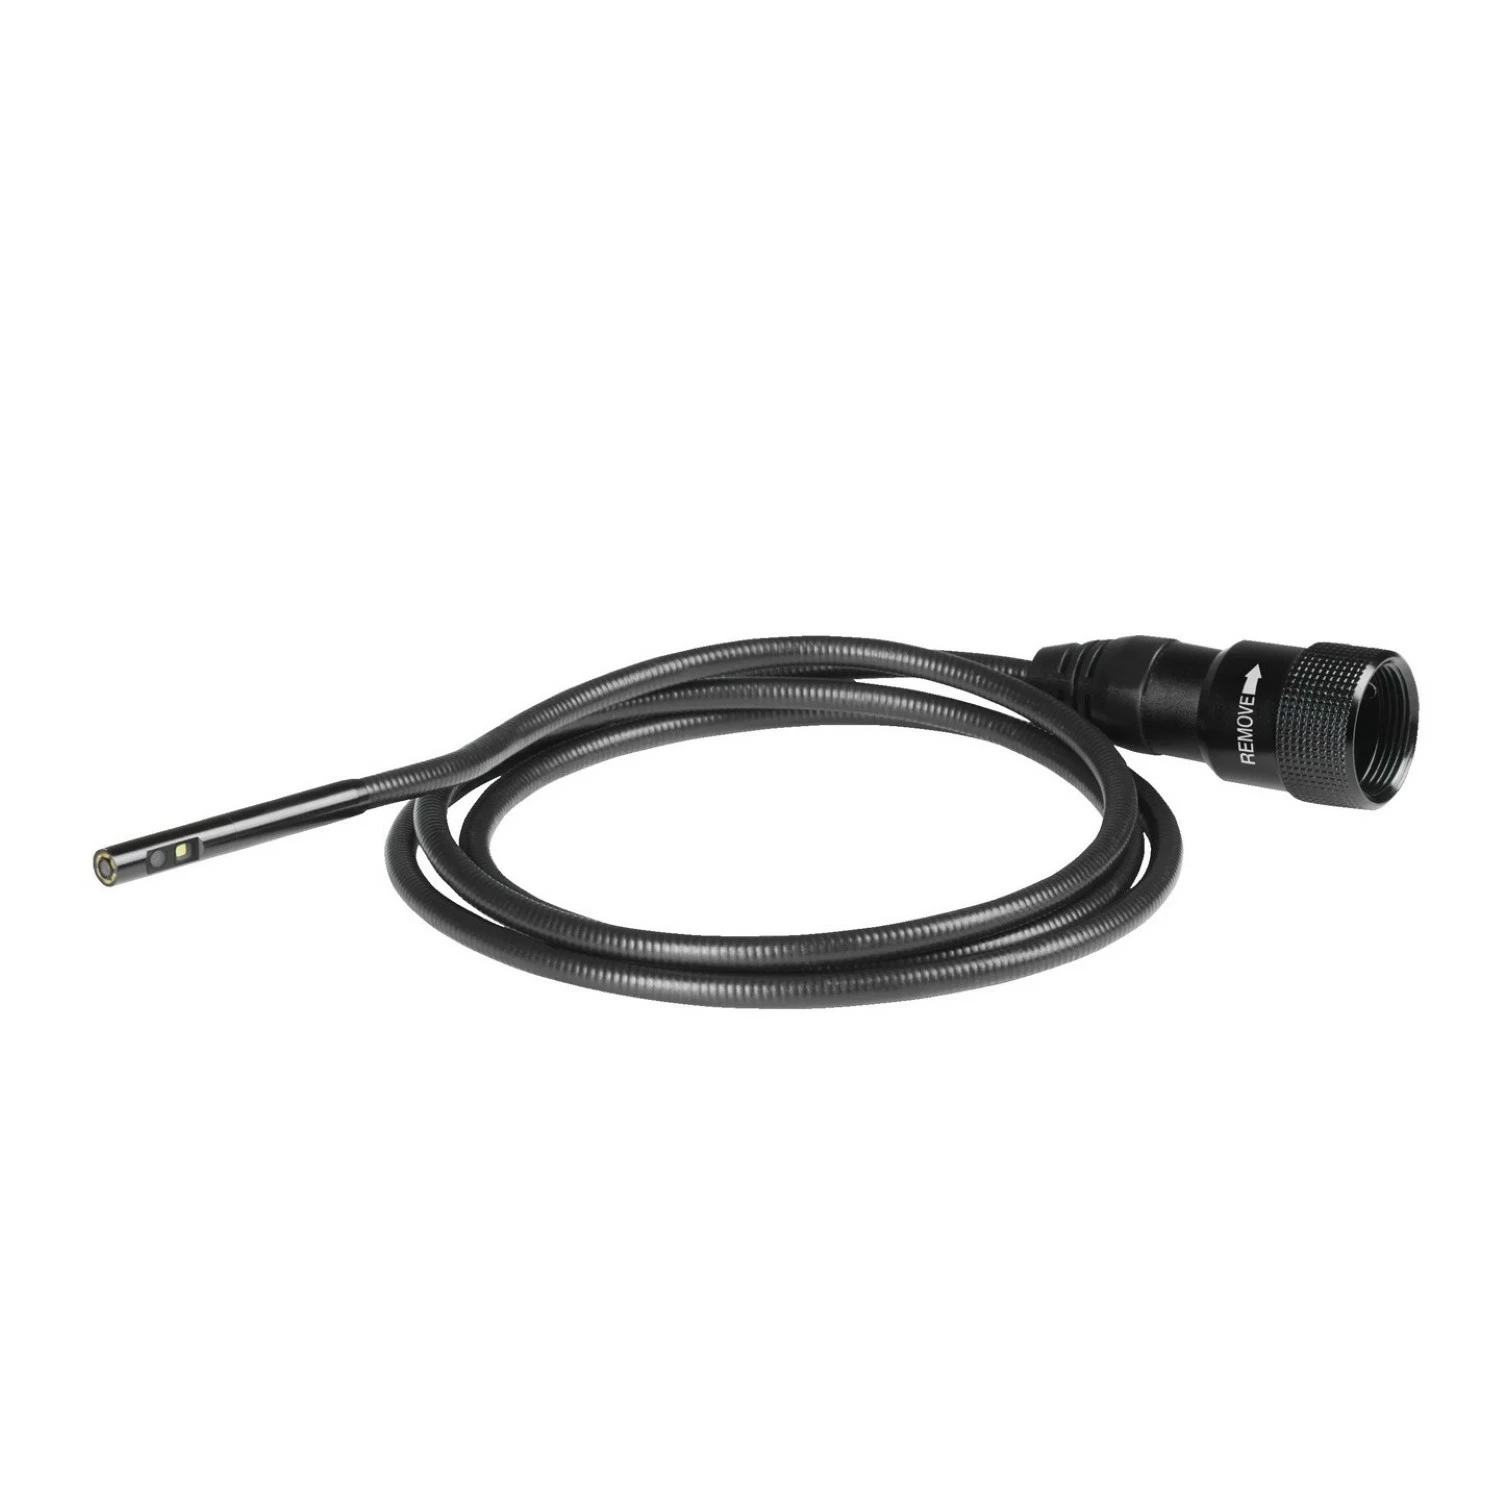 Milwaukee 4932492938 5.0 mm replacement camera cable for M12™ automotive inspection camera-image